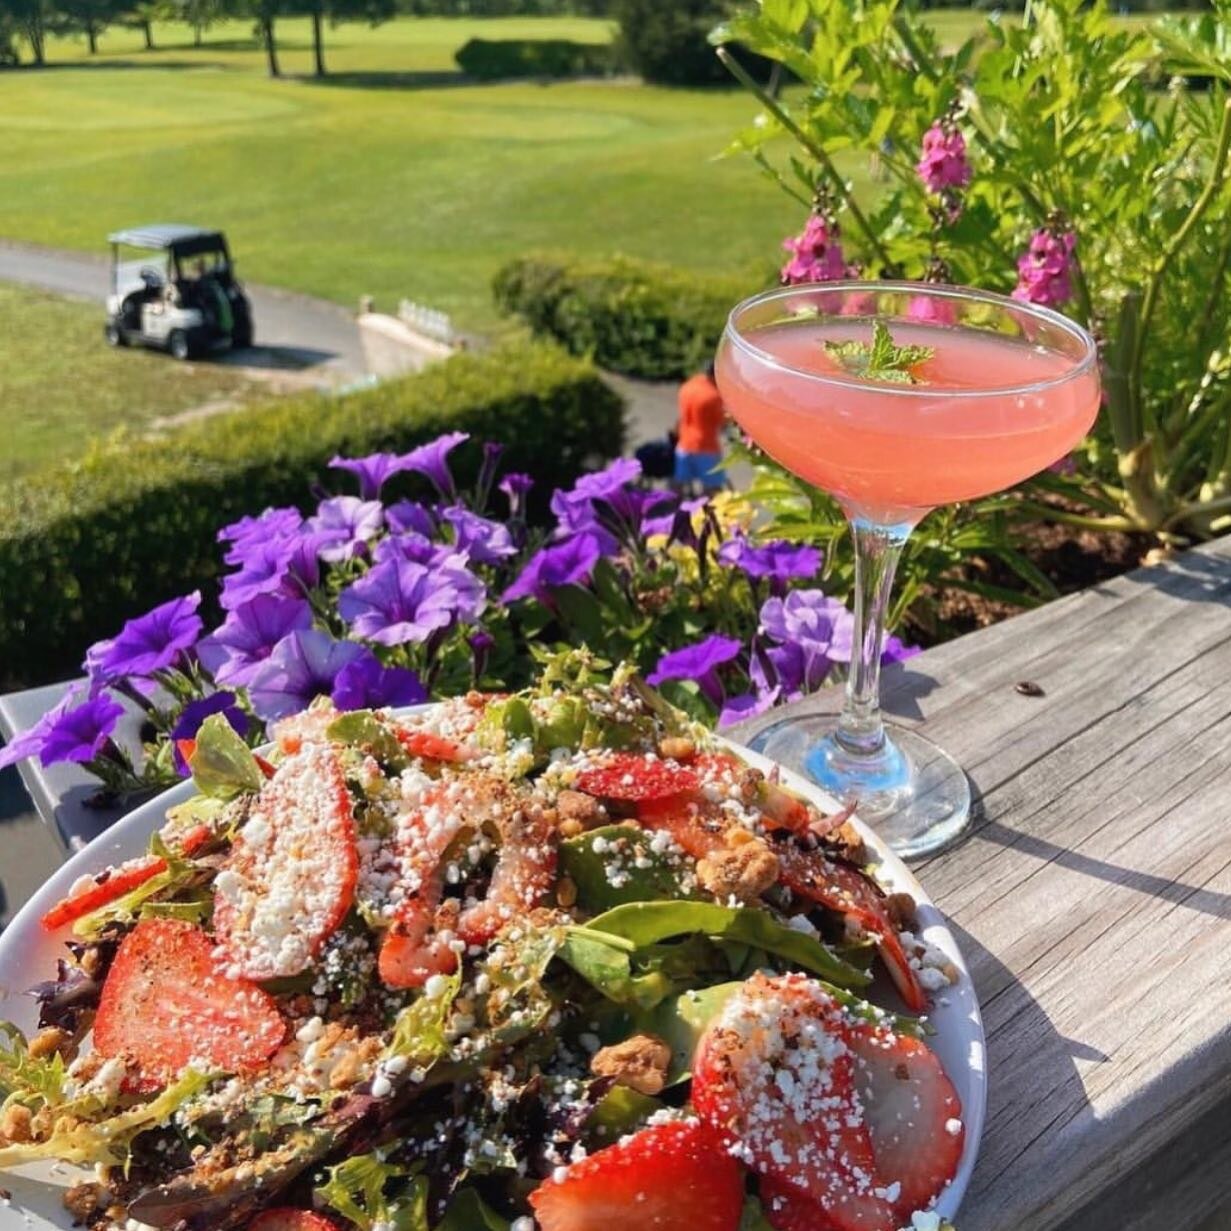 Is it too soon for a Summer Friday? 

Drop a ☀️in the comments if you&rsquo;re planning to finish early to enjoy the amazing weather. 

#odeensbbq #ridgefieldgolfcourse #outdoordining #restaurantsct #ridgefieldct 
#bbqct #bbqlife